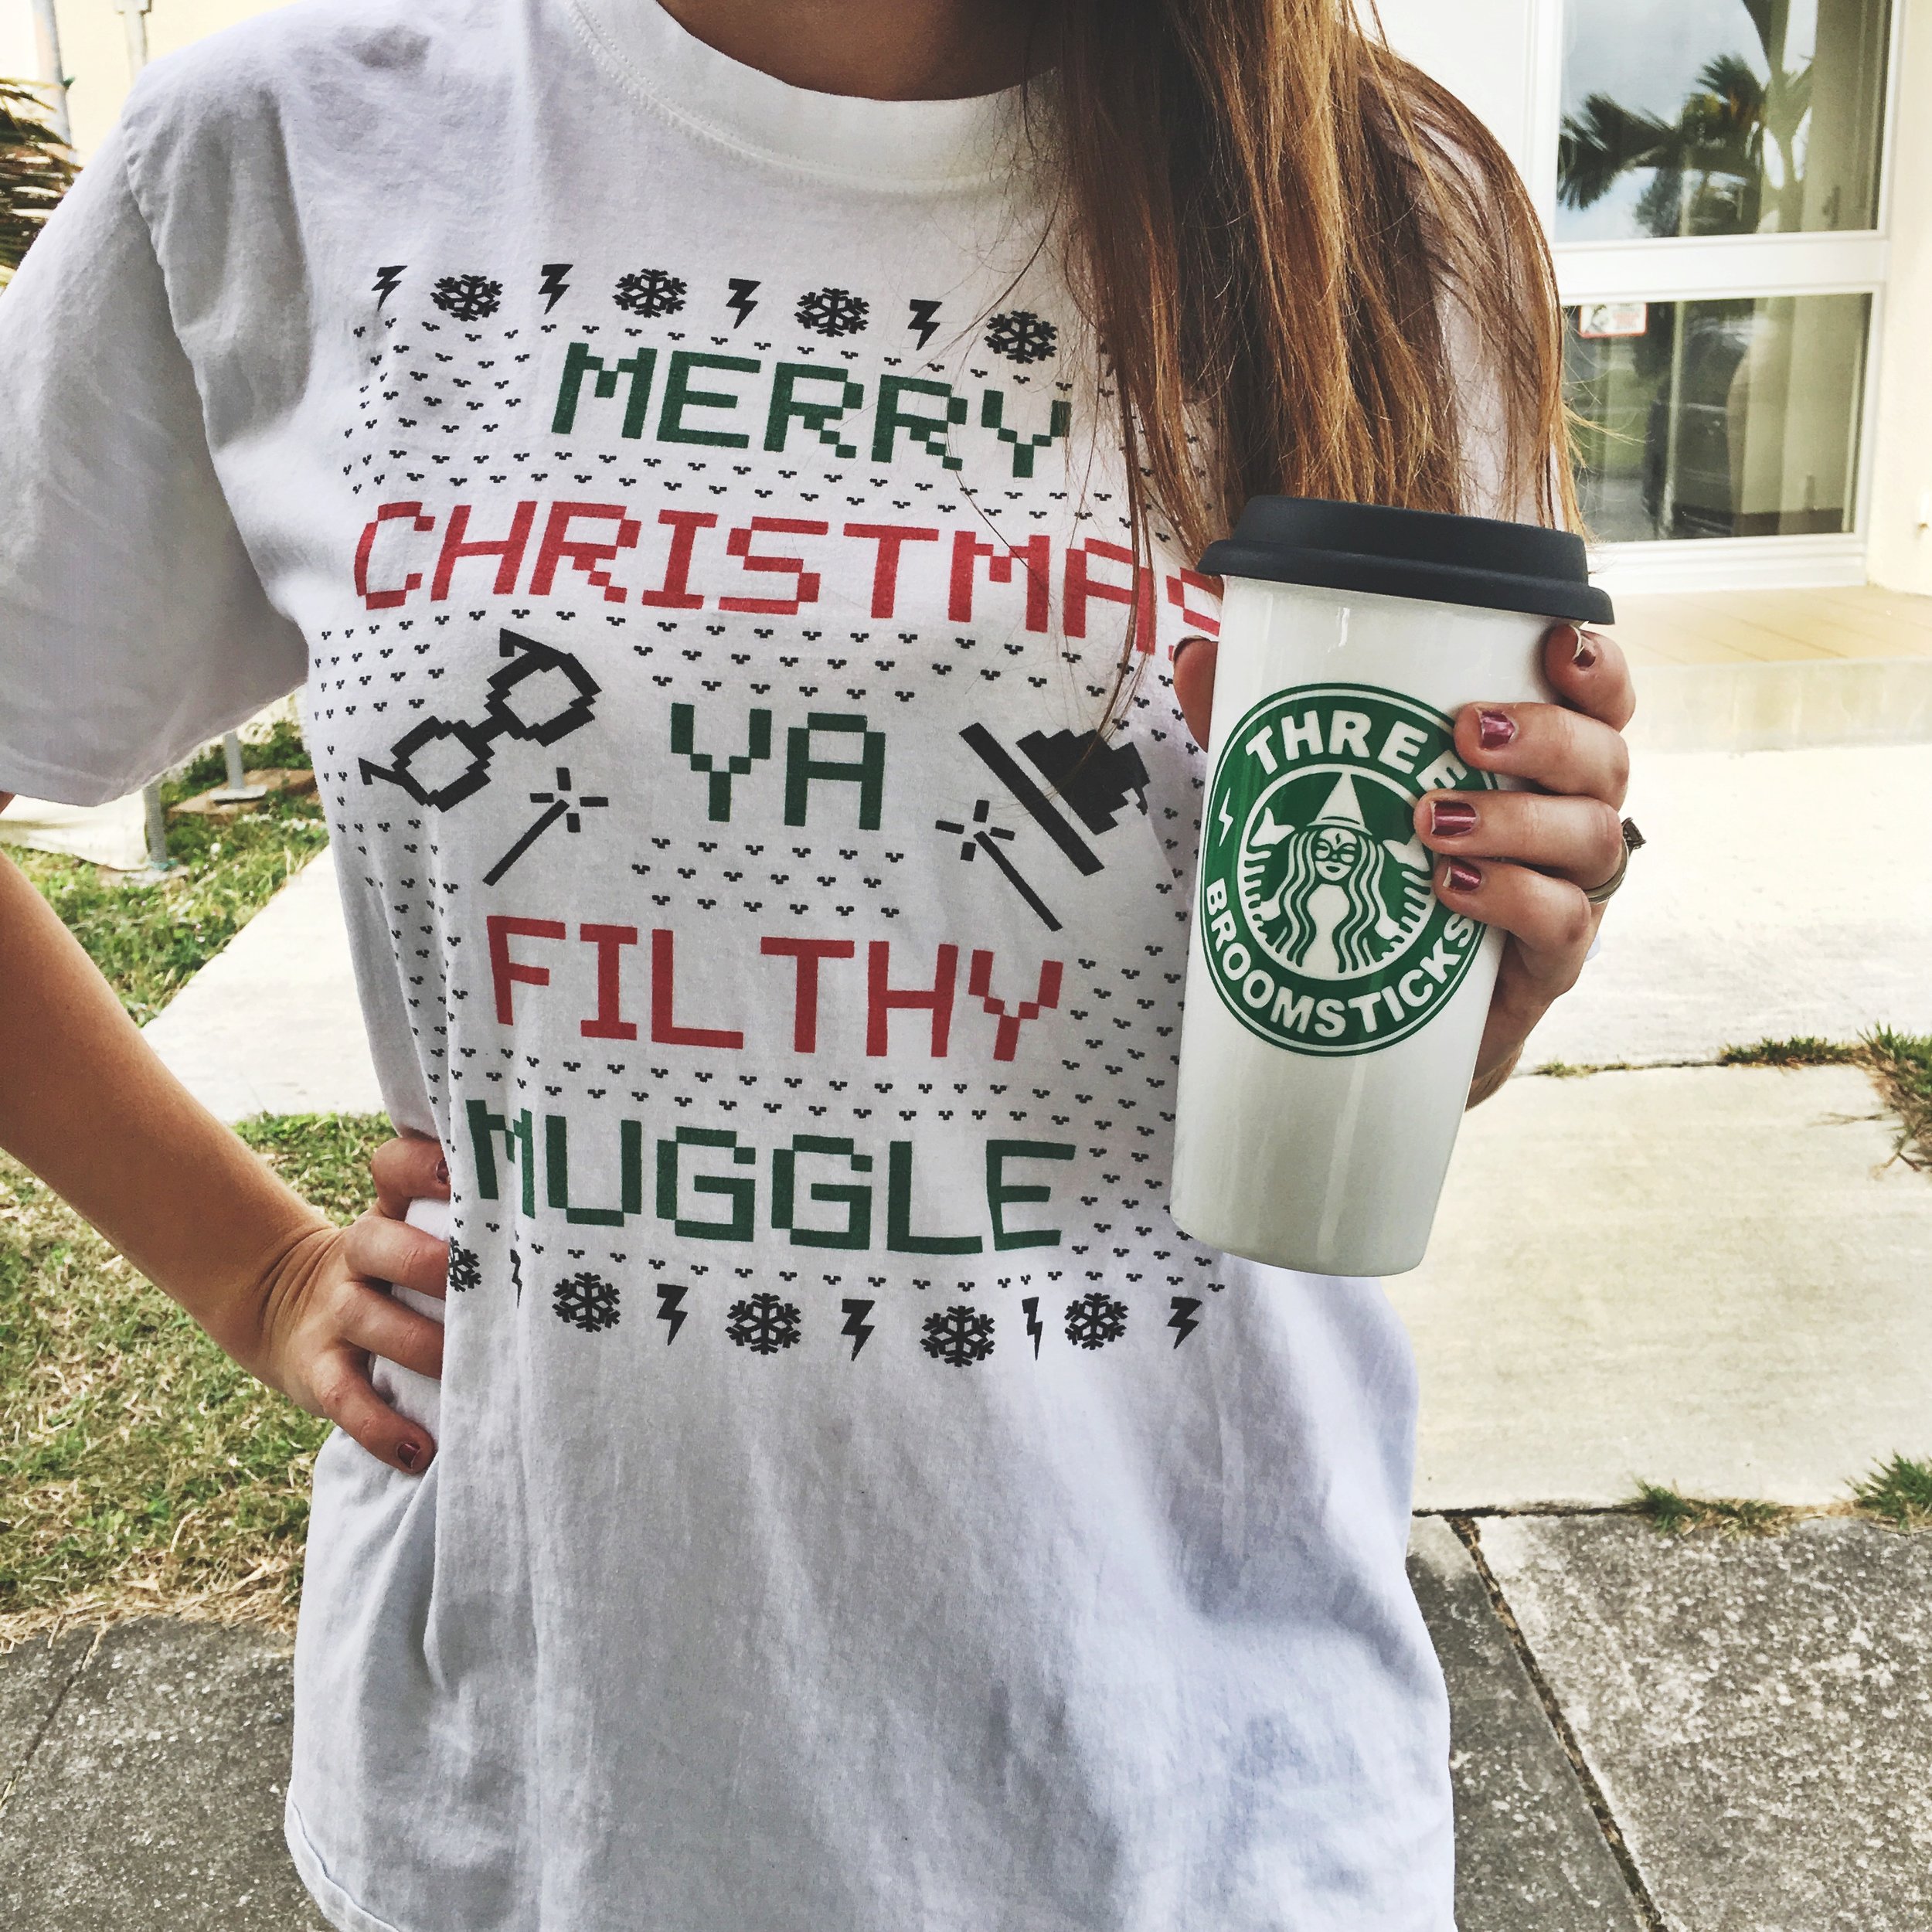 Merry Christmas ya filthy muggle shirt for a Potter party. // photo from mkkmdesigns.com